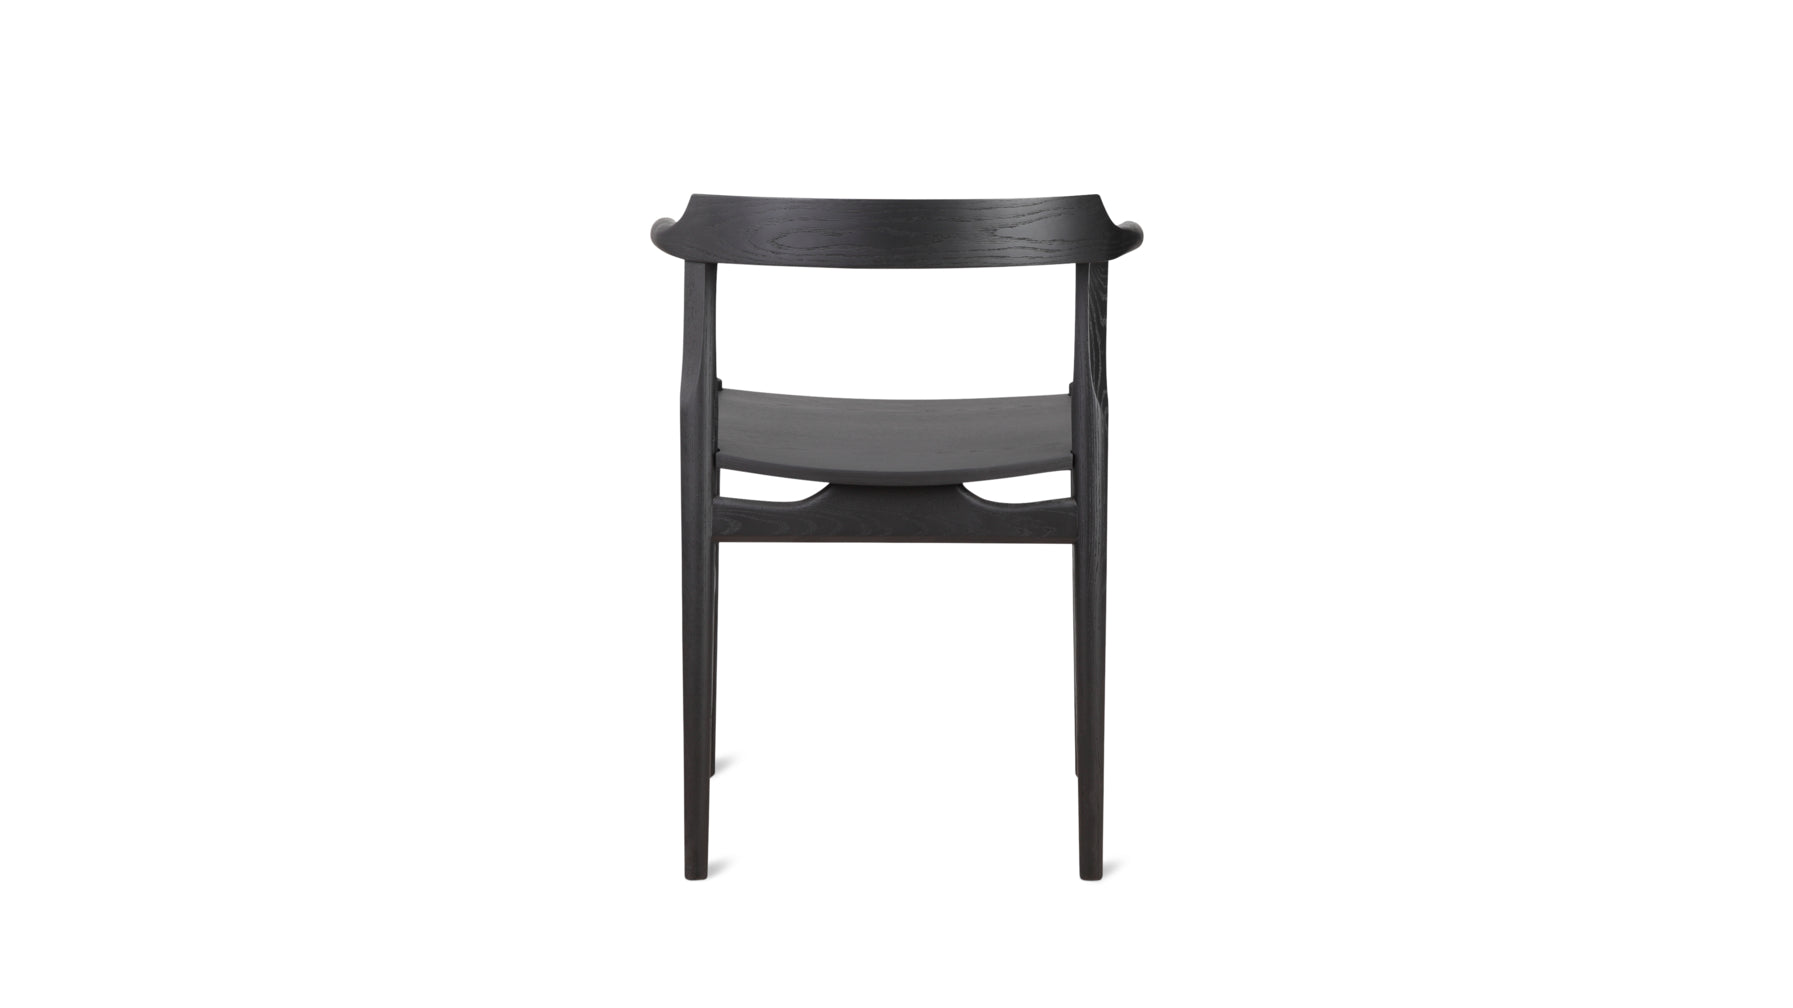 Tuck In Dining Chair, Black Ash, Wood Seat - Image 6